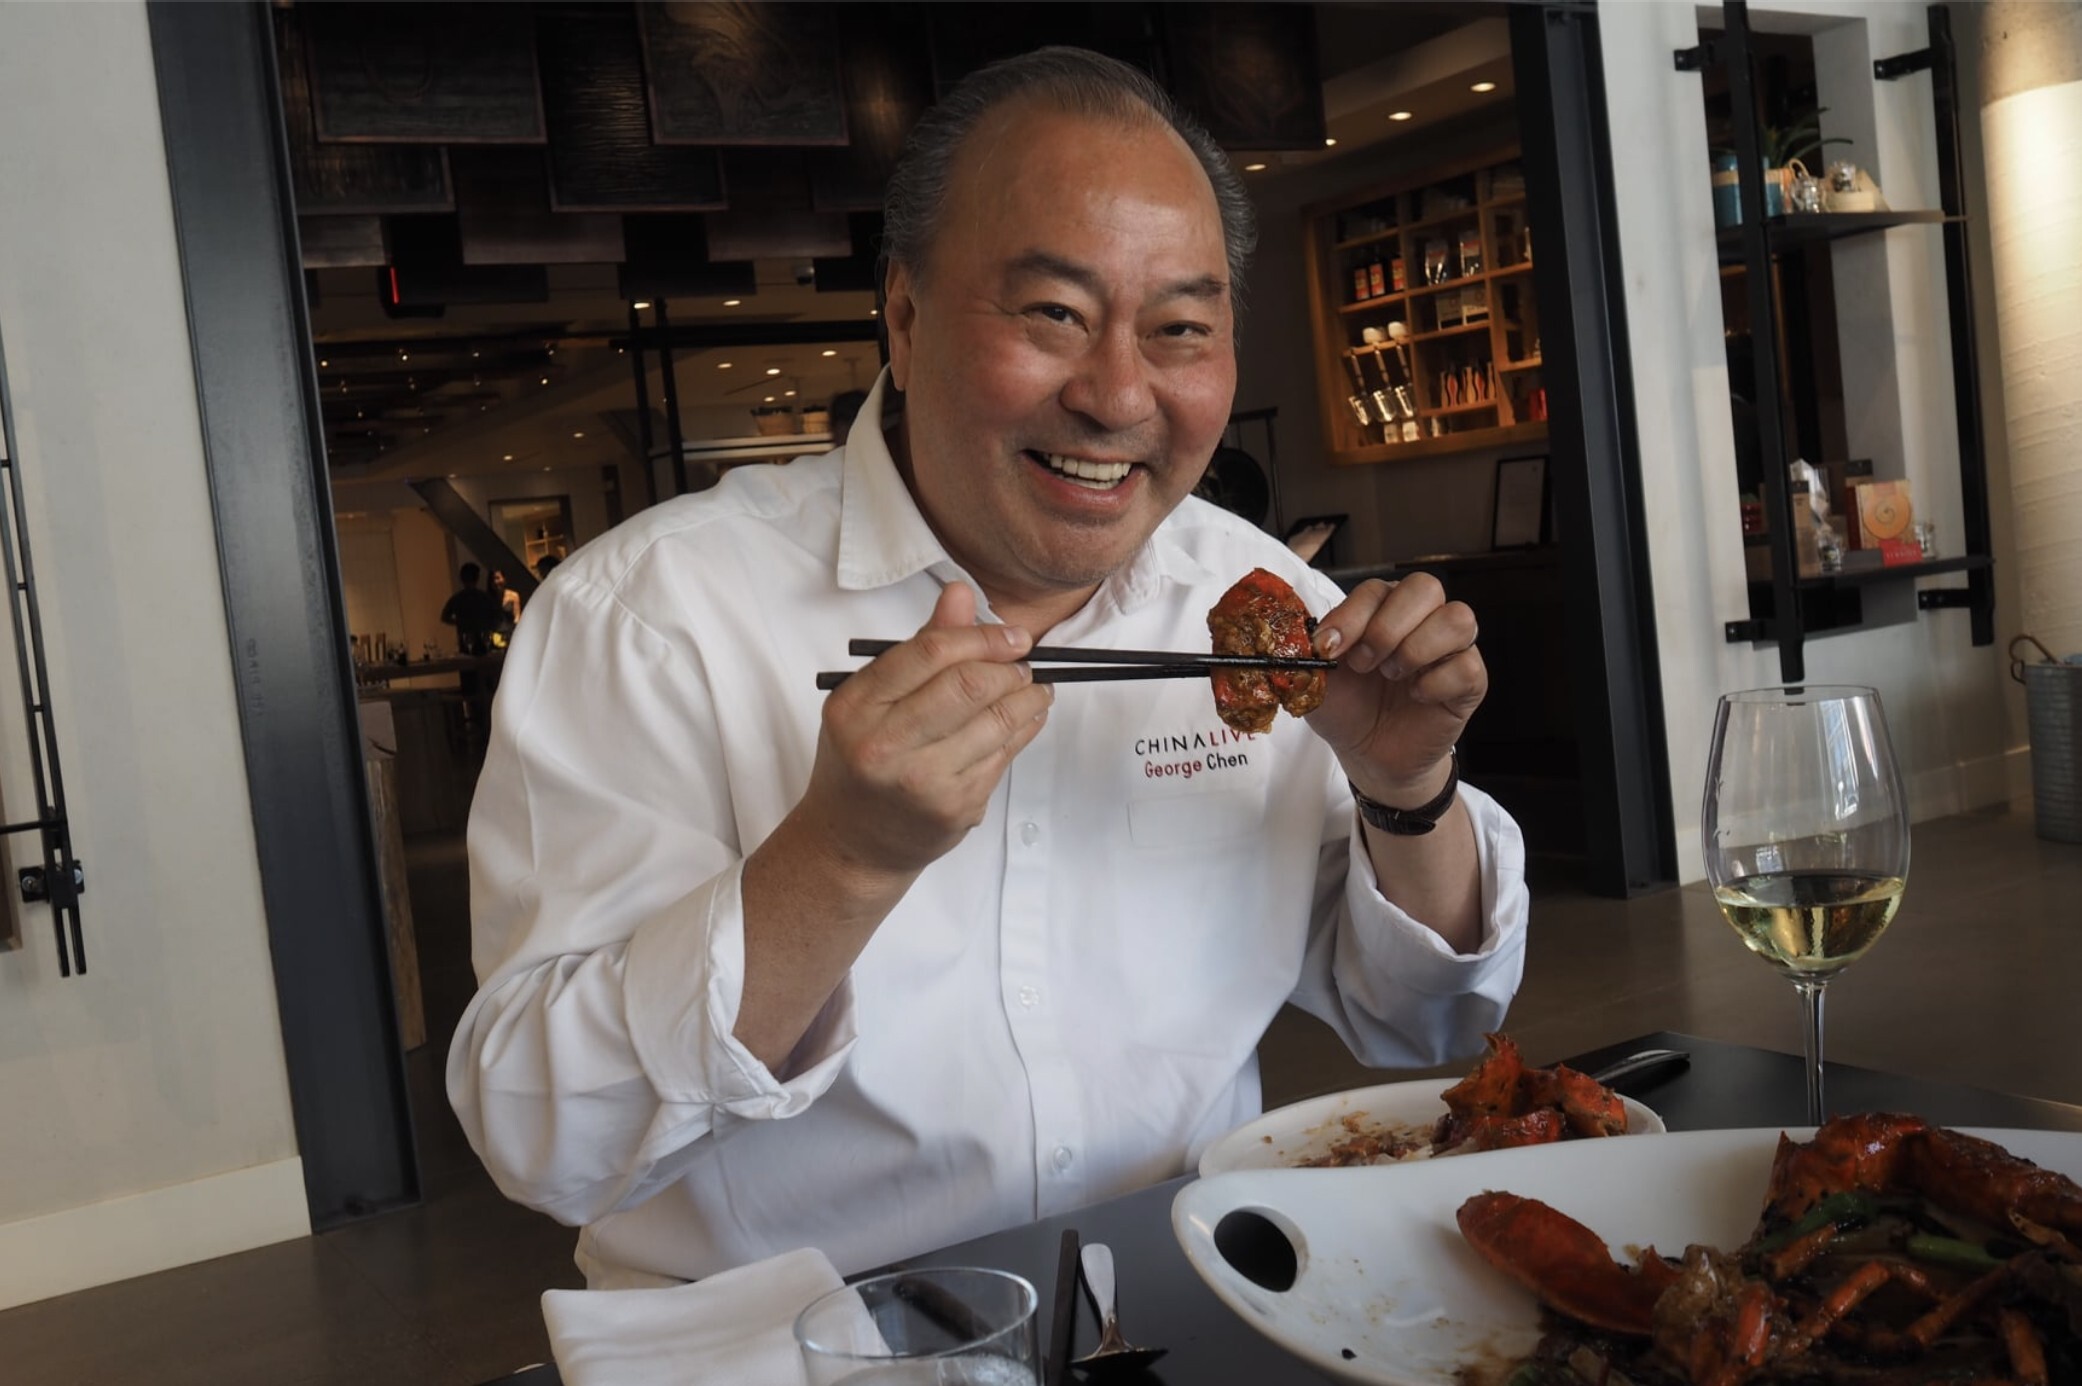 Chef George Chen is using “ghost kitchens” – cooking facilities set up for delivery food only – to help his Chinese food emporium’s signature dishes reach customers across the San Francisco Bay Area. Photo: Facebook